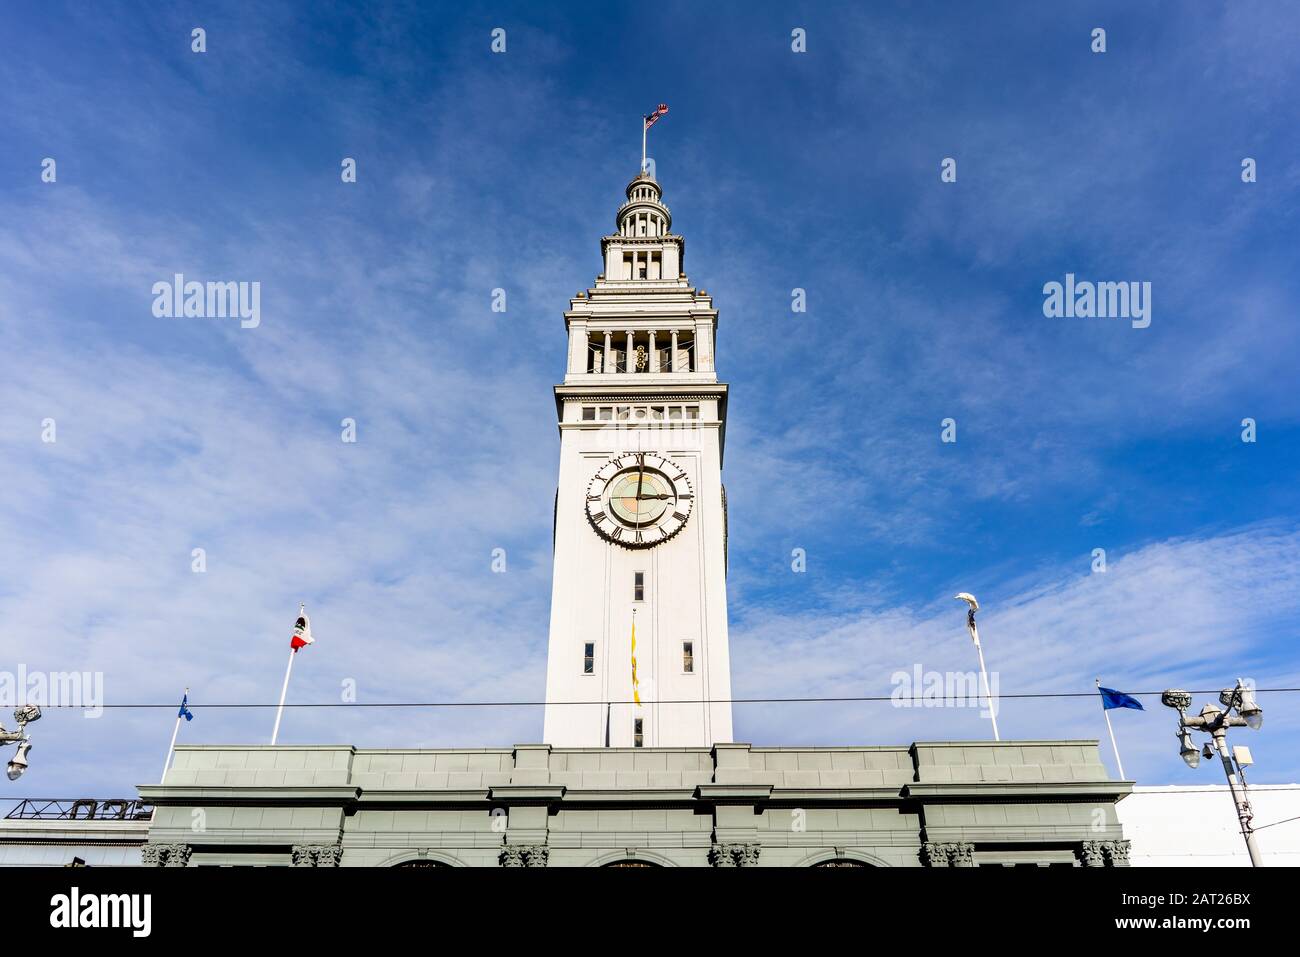 The Ferry building clock tower rising above the ferry terminal, San Francisco, California Stock Photo